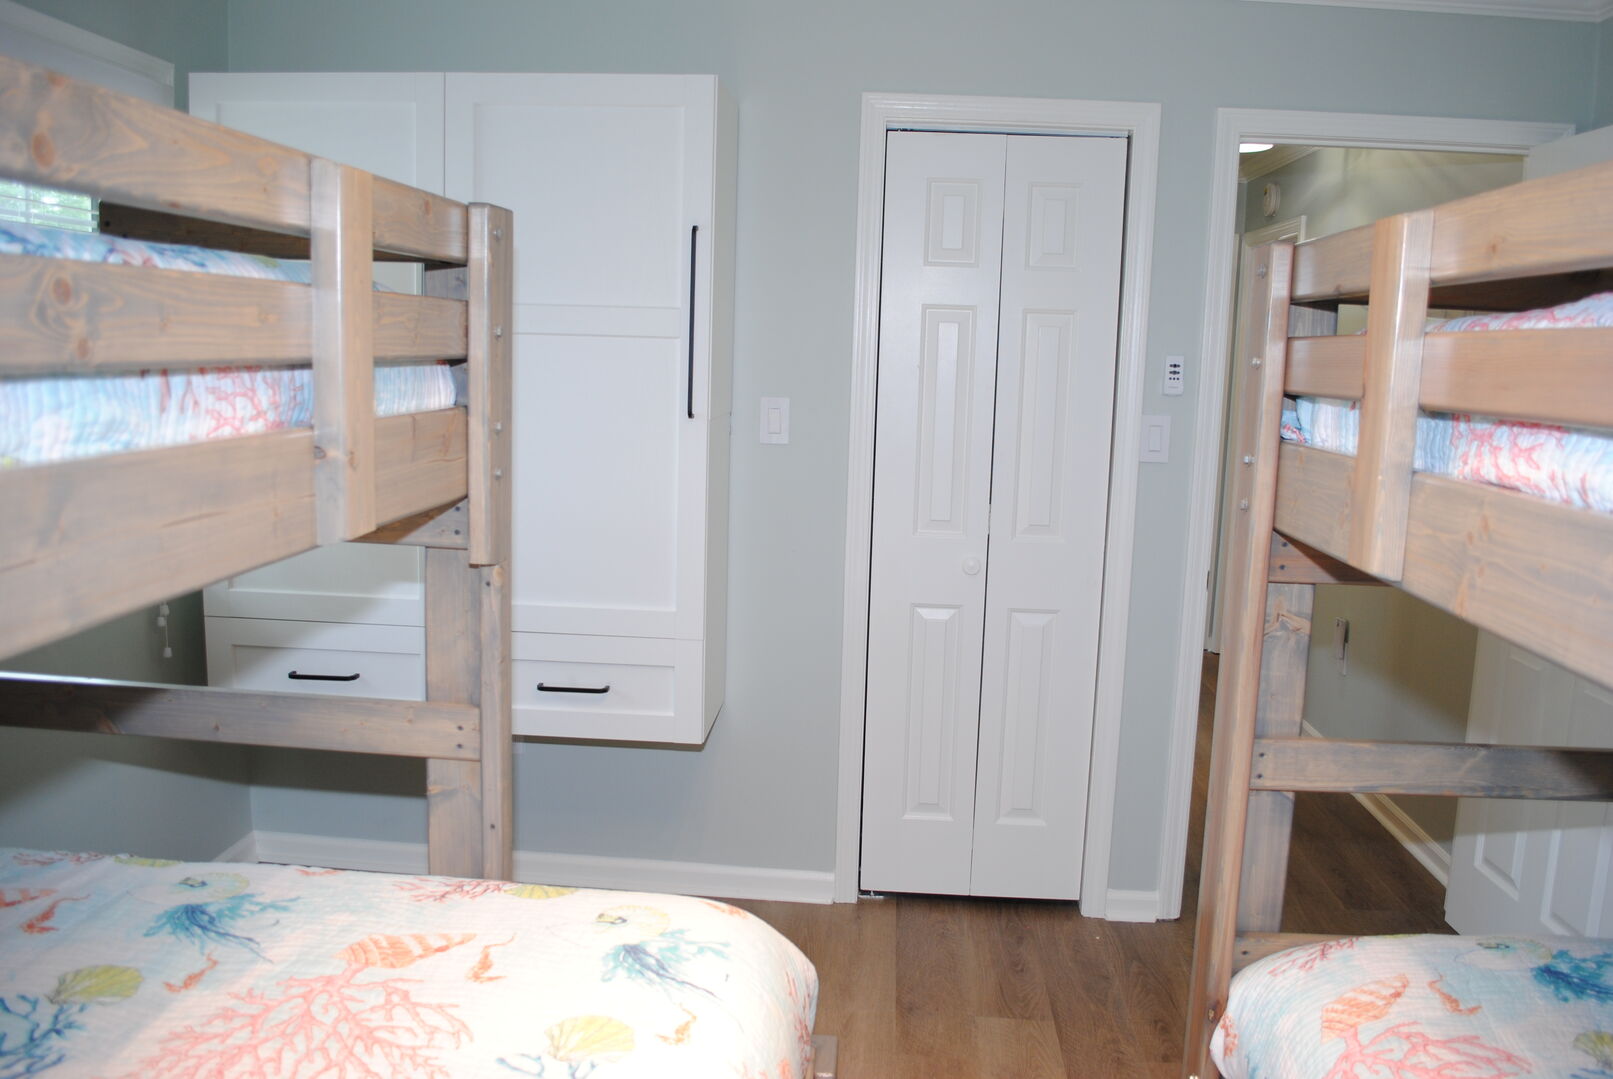 2 Sets of Bunk Beds (Queen Over XL Twin; 2 XL Twins)